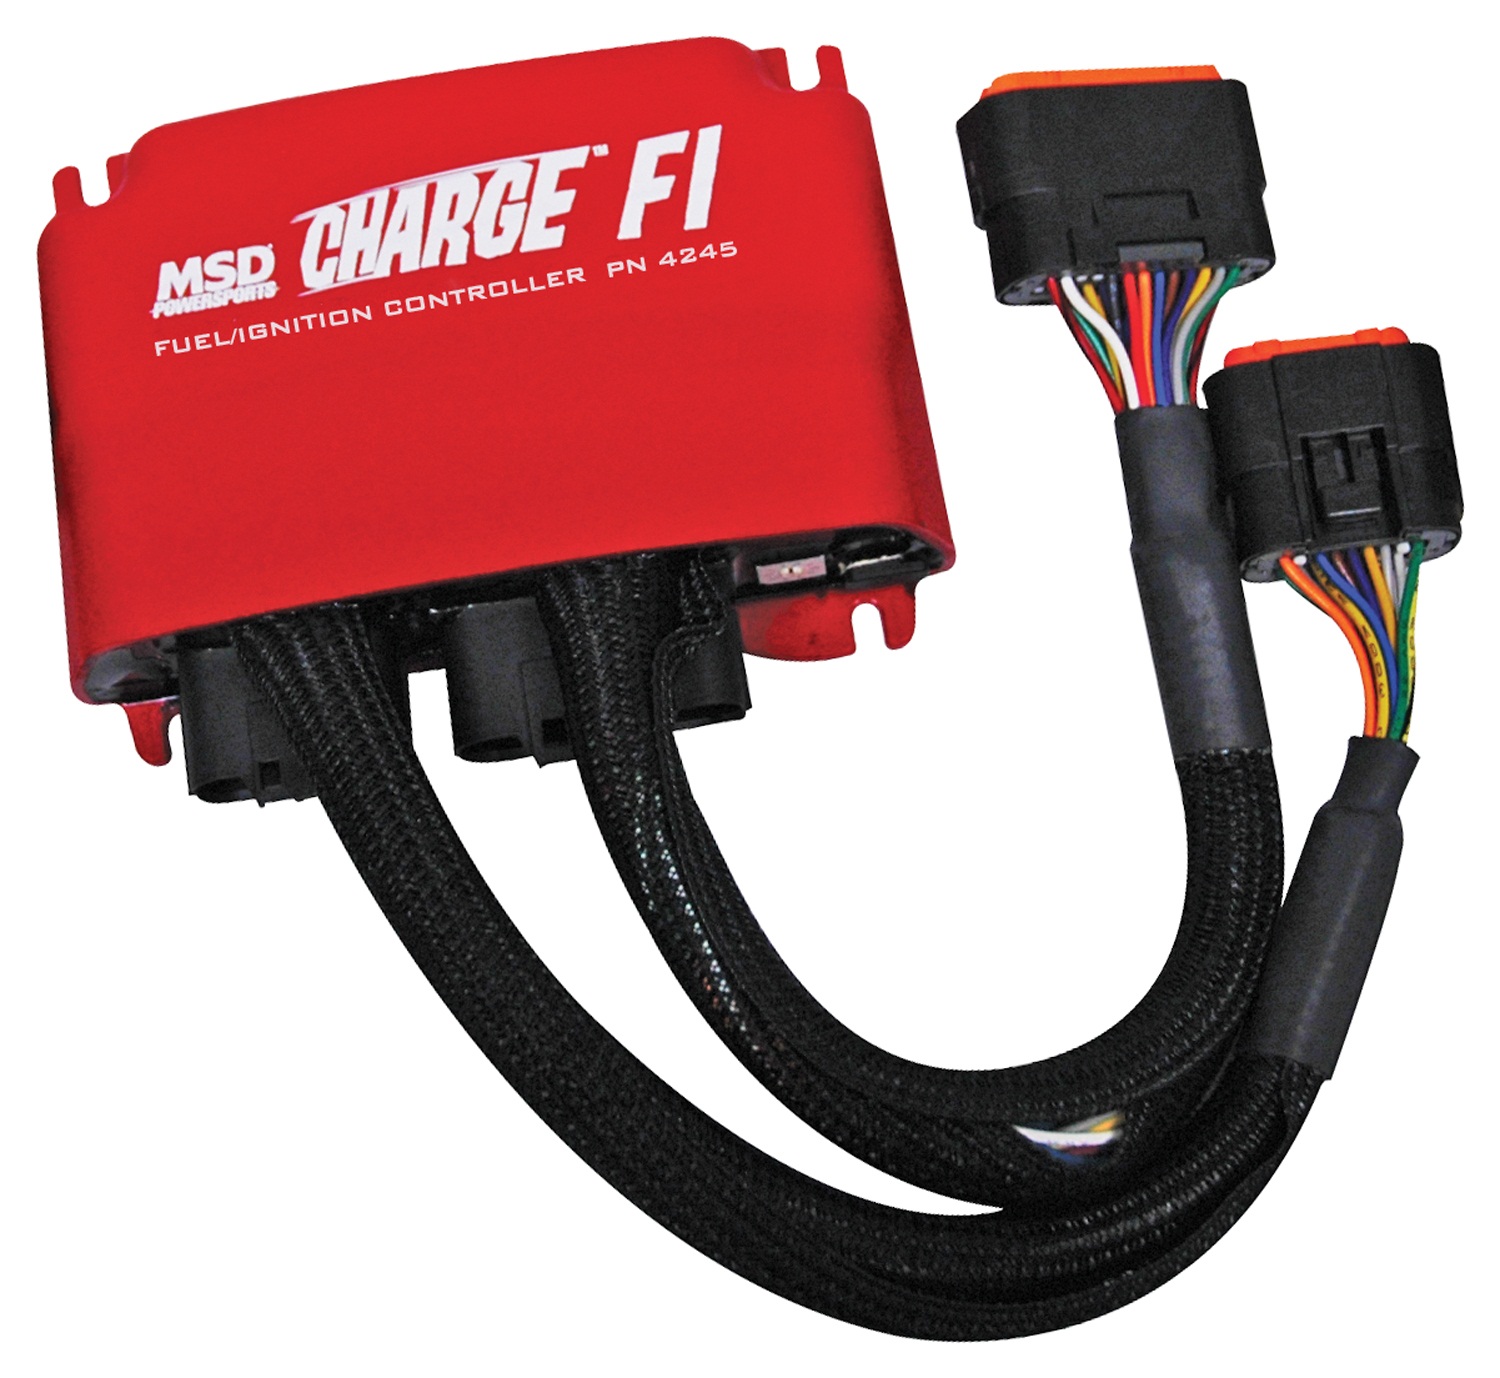 MSD Ignition MSD Ignition 4245 Charge FI Fuel/Ignition Controller 09-11 YXR700F Rhino 700 FI